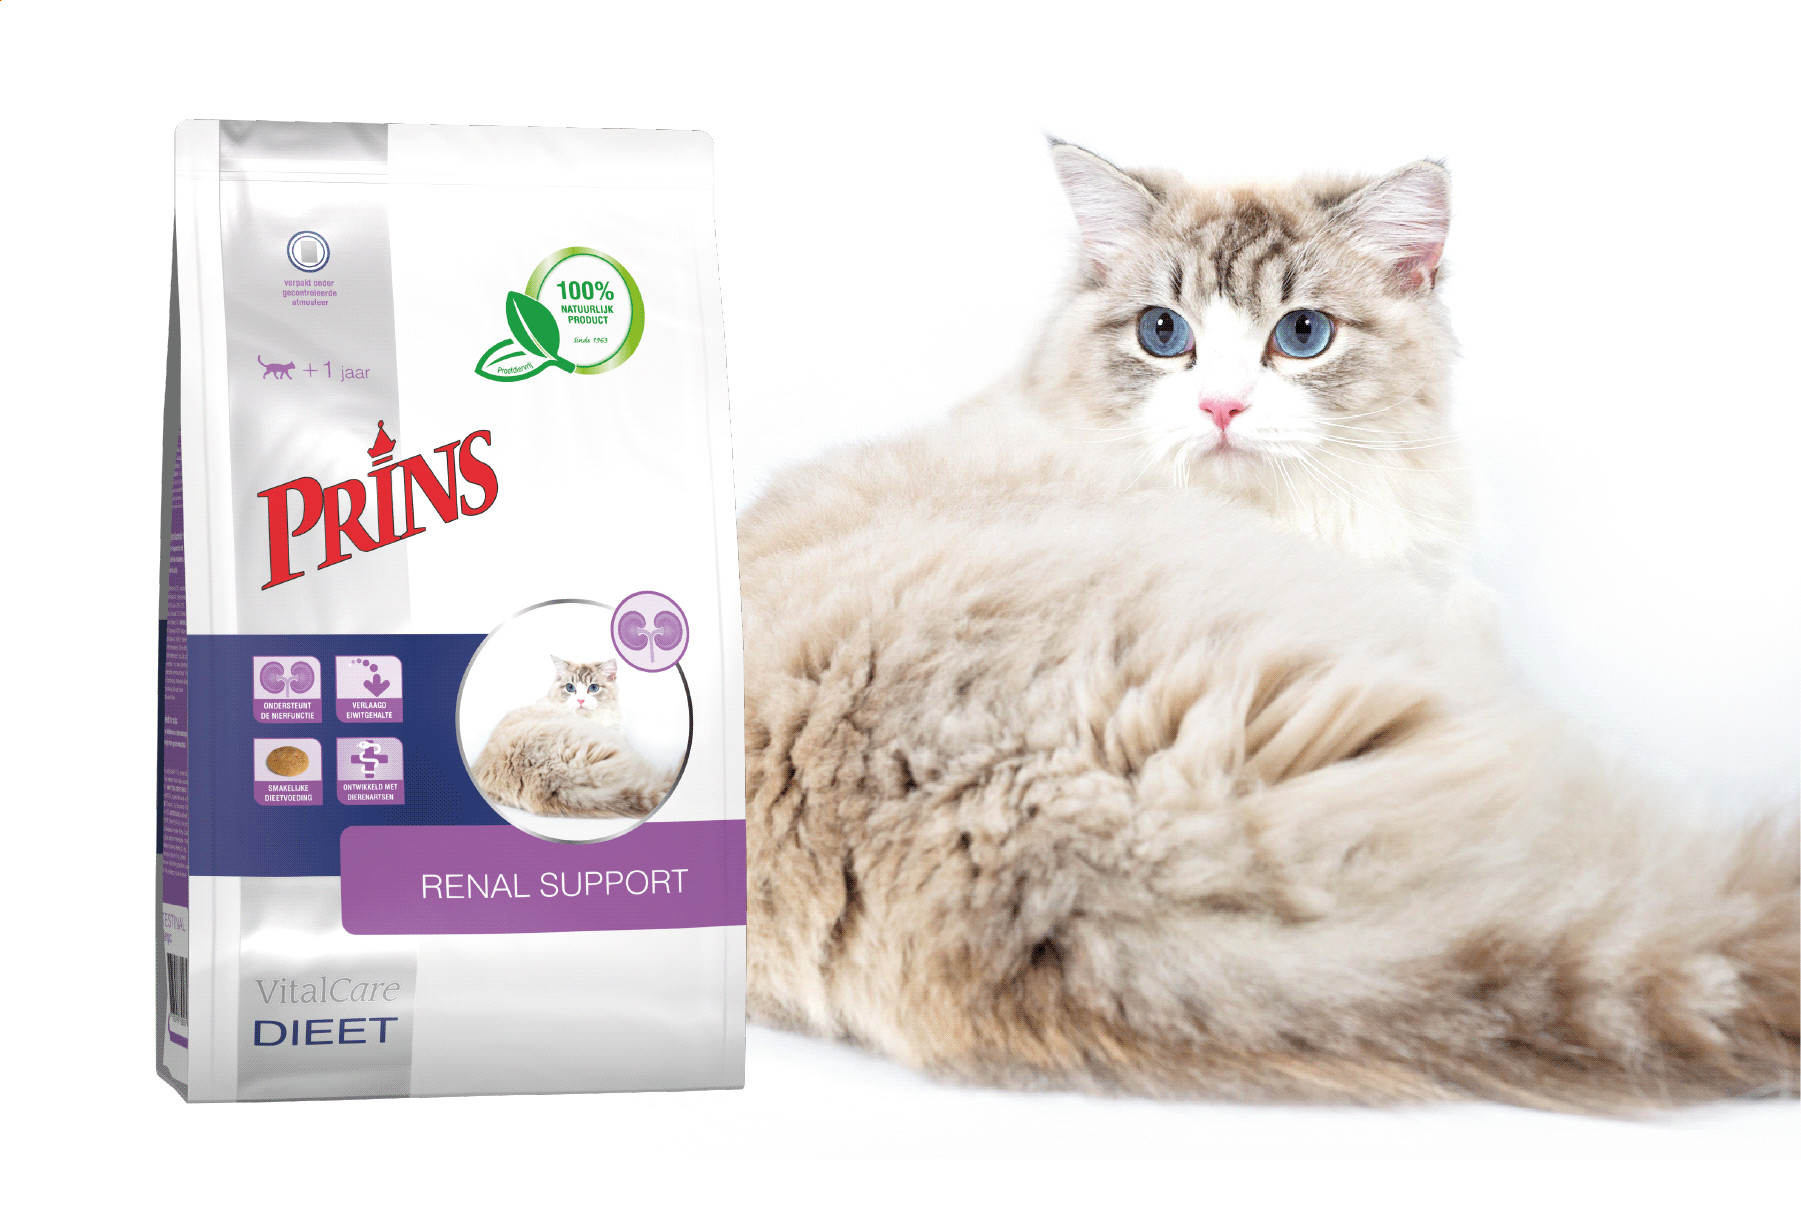 Prins Vitalcare Diet Renal Support pour chat